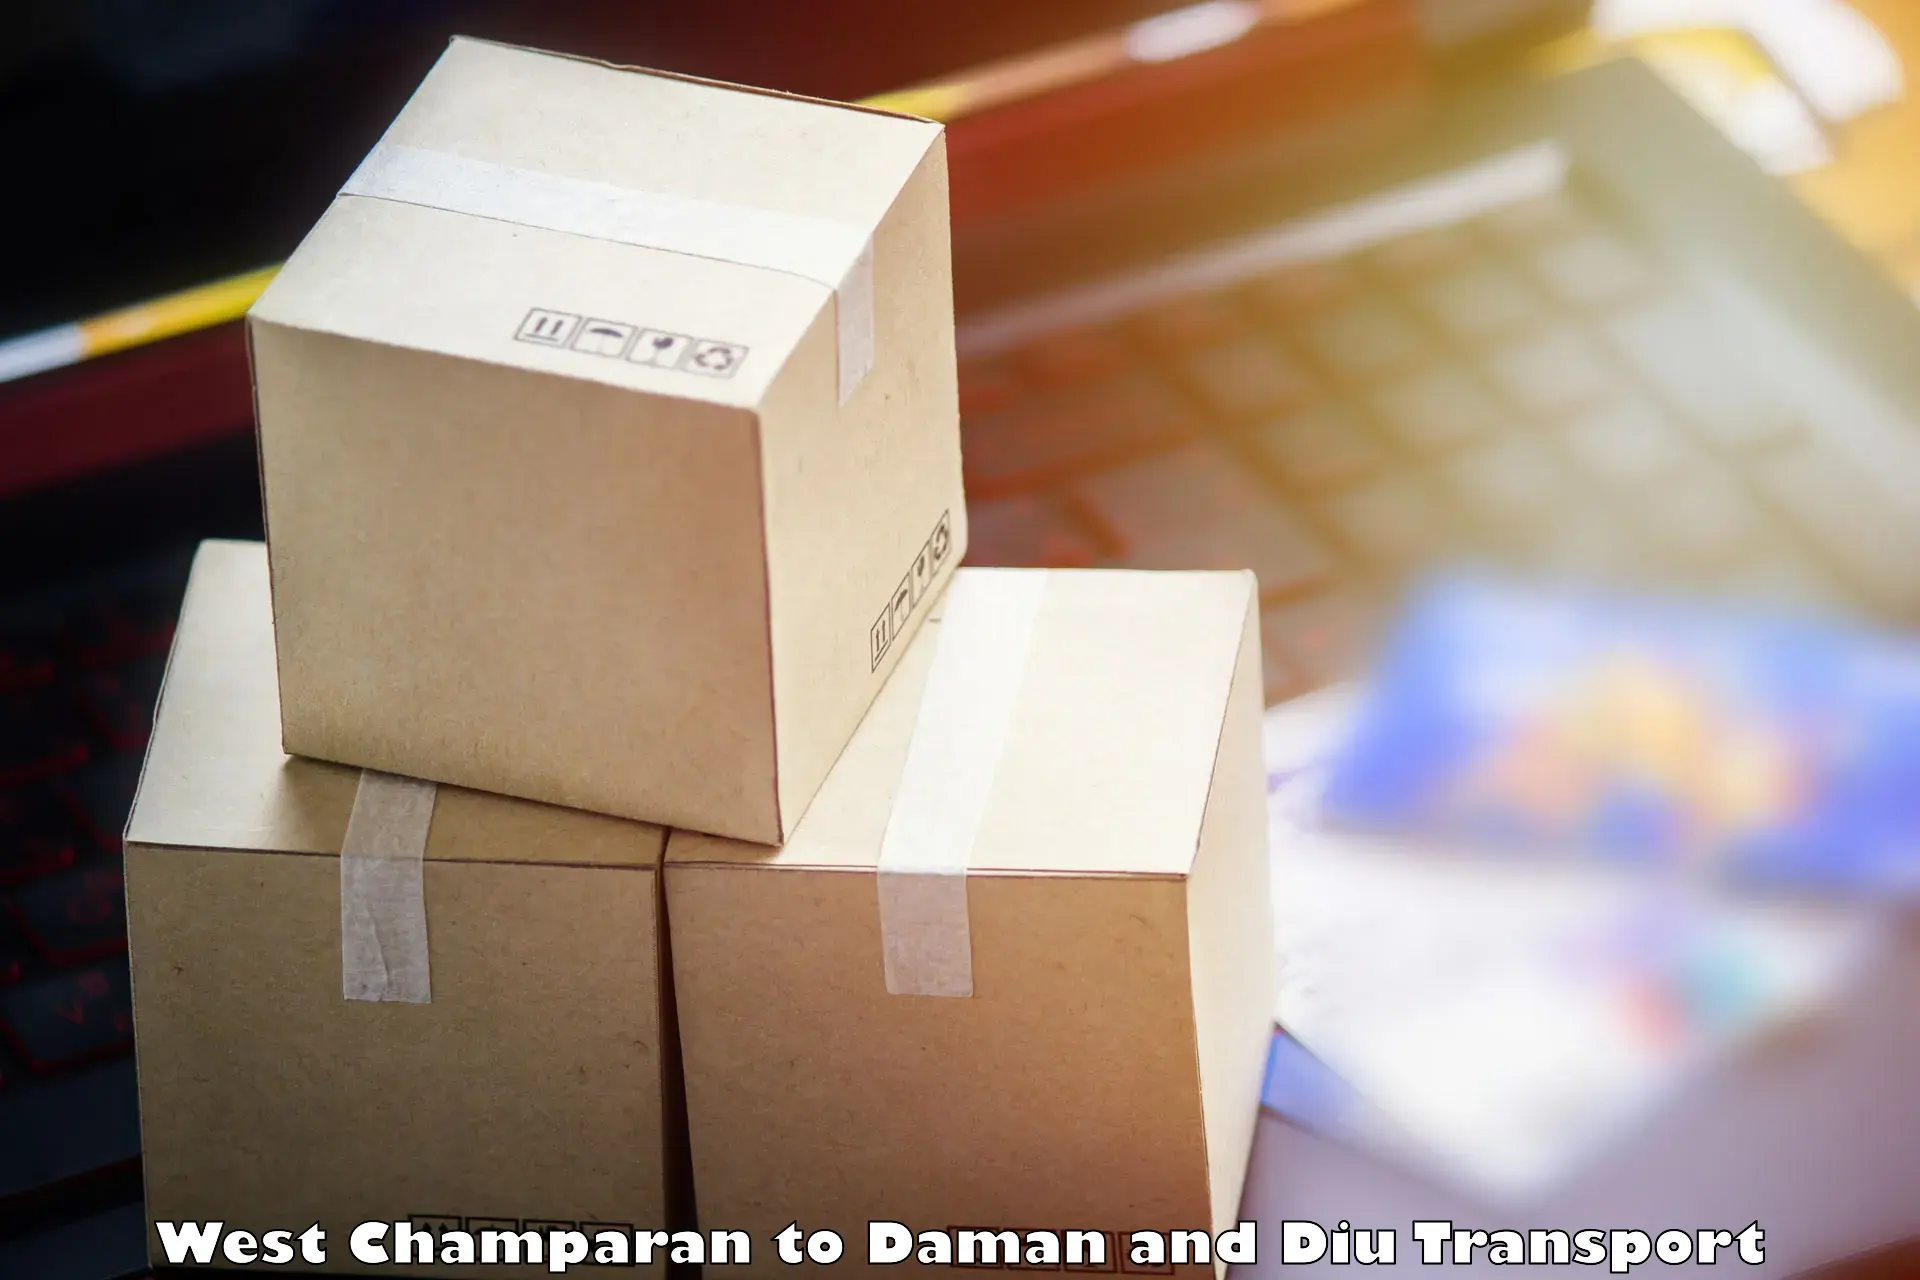 Air freight transport services West Champaran to Daman and Diu